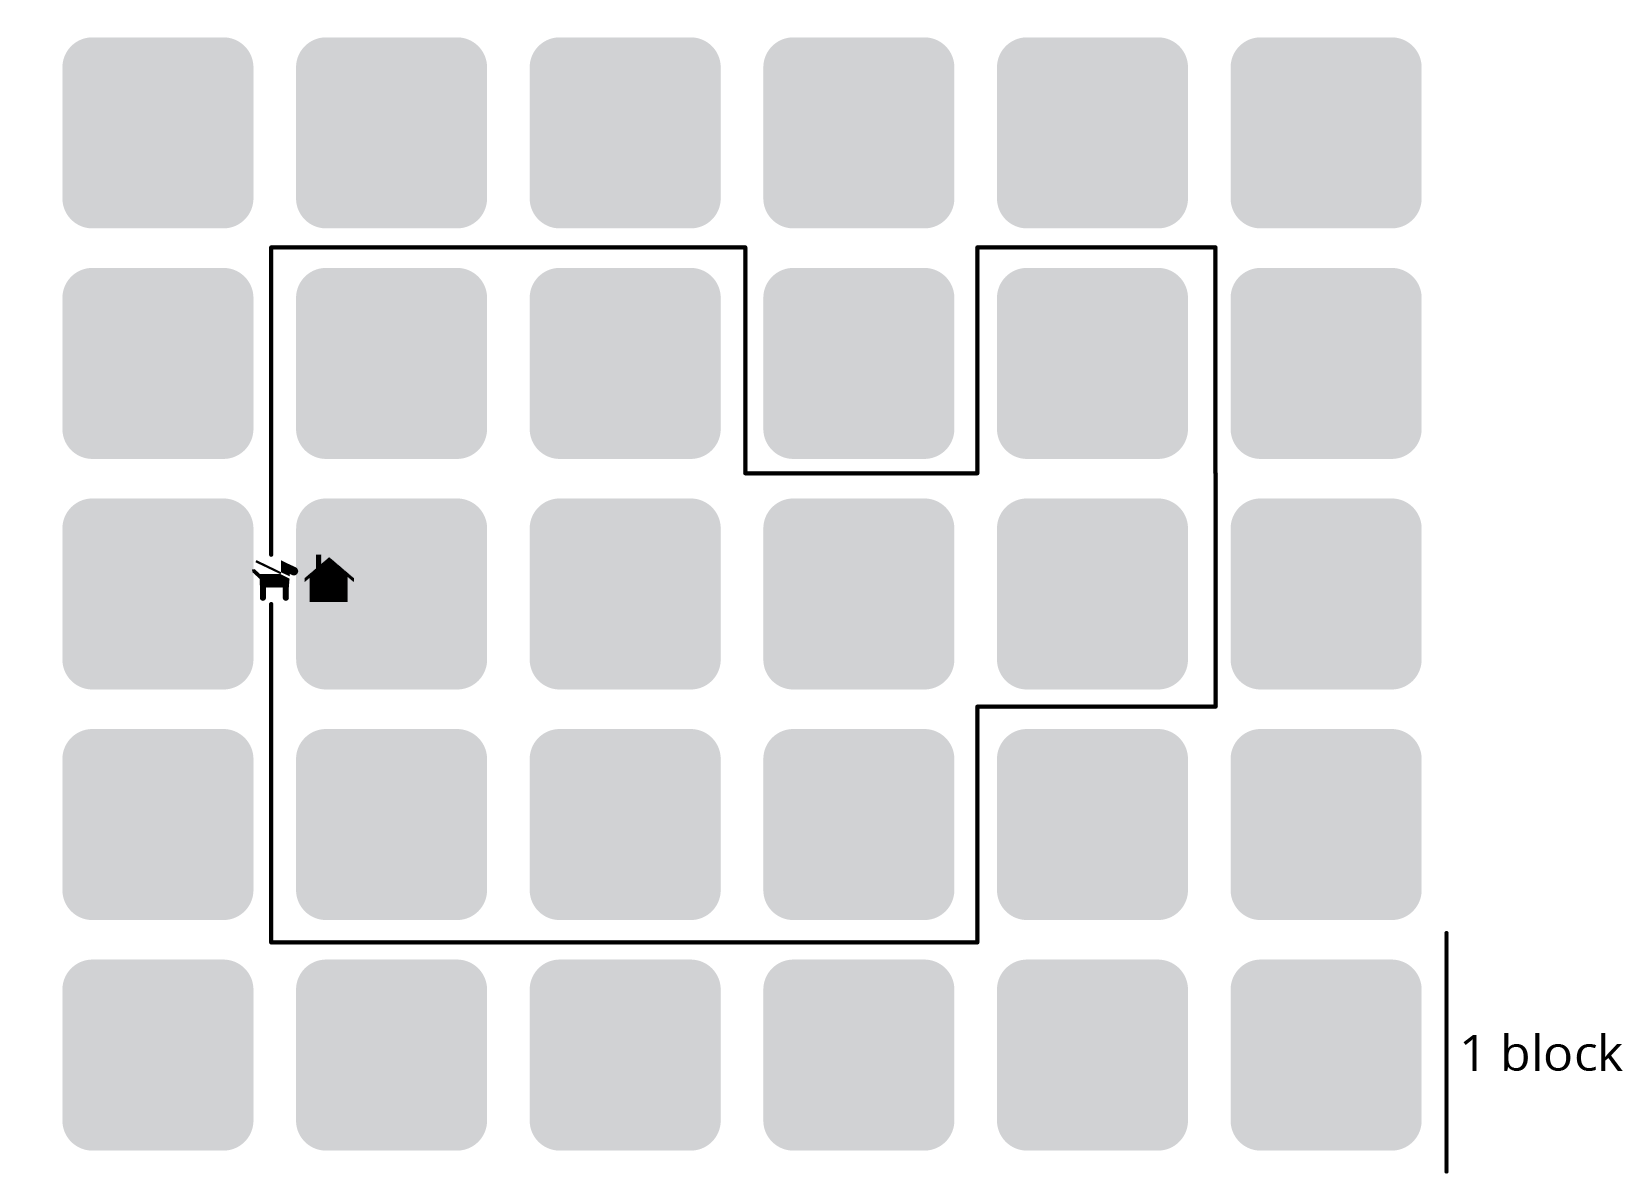 a grid of 36 squares with 10 of them enclosed by a dog walking path.  Each square represents 1 block.